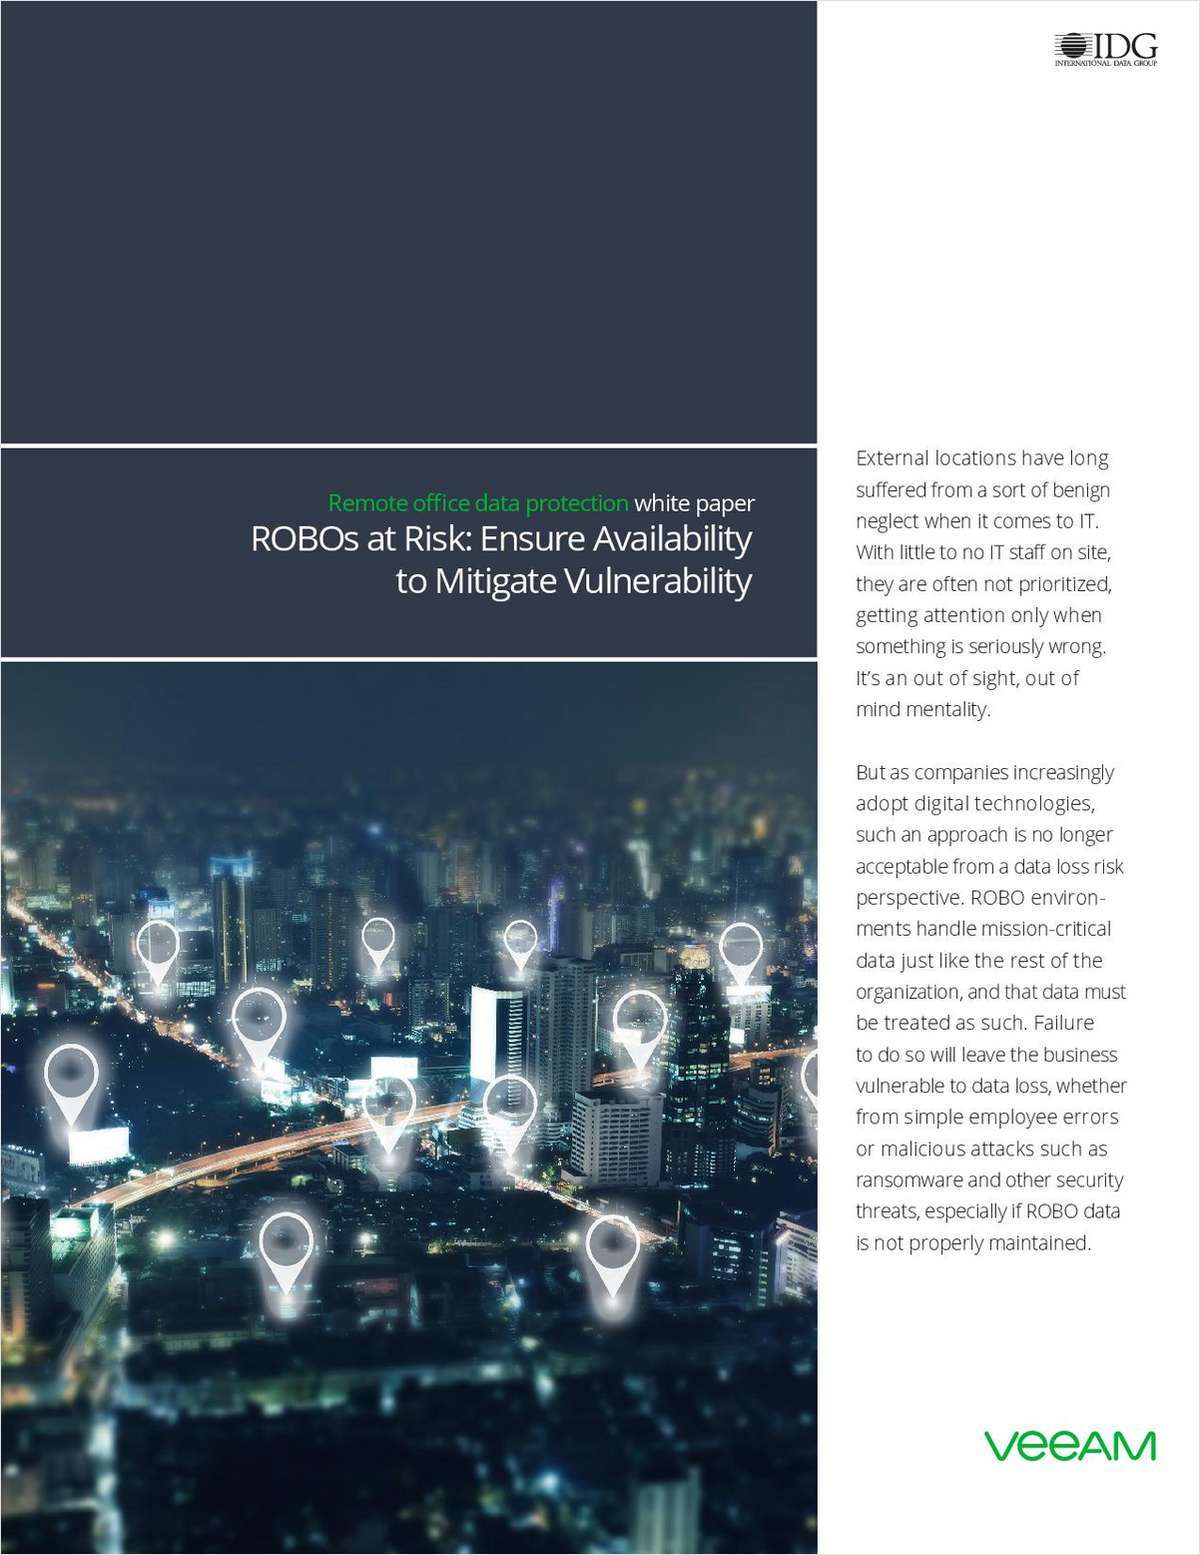 ROBOs at Risk: Ensure Availability to Mitigate Vulnerability